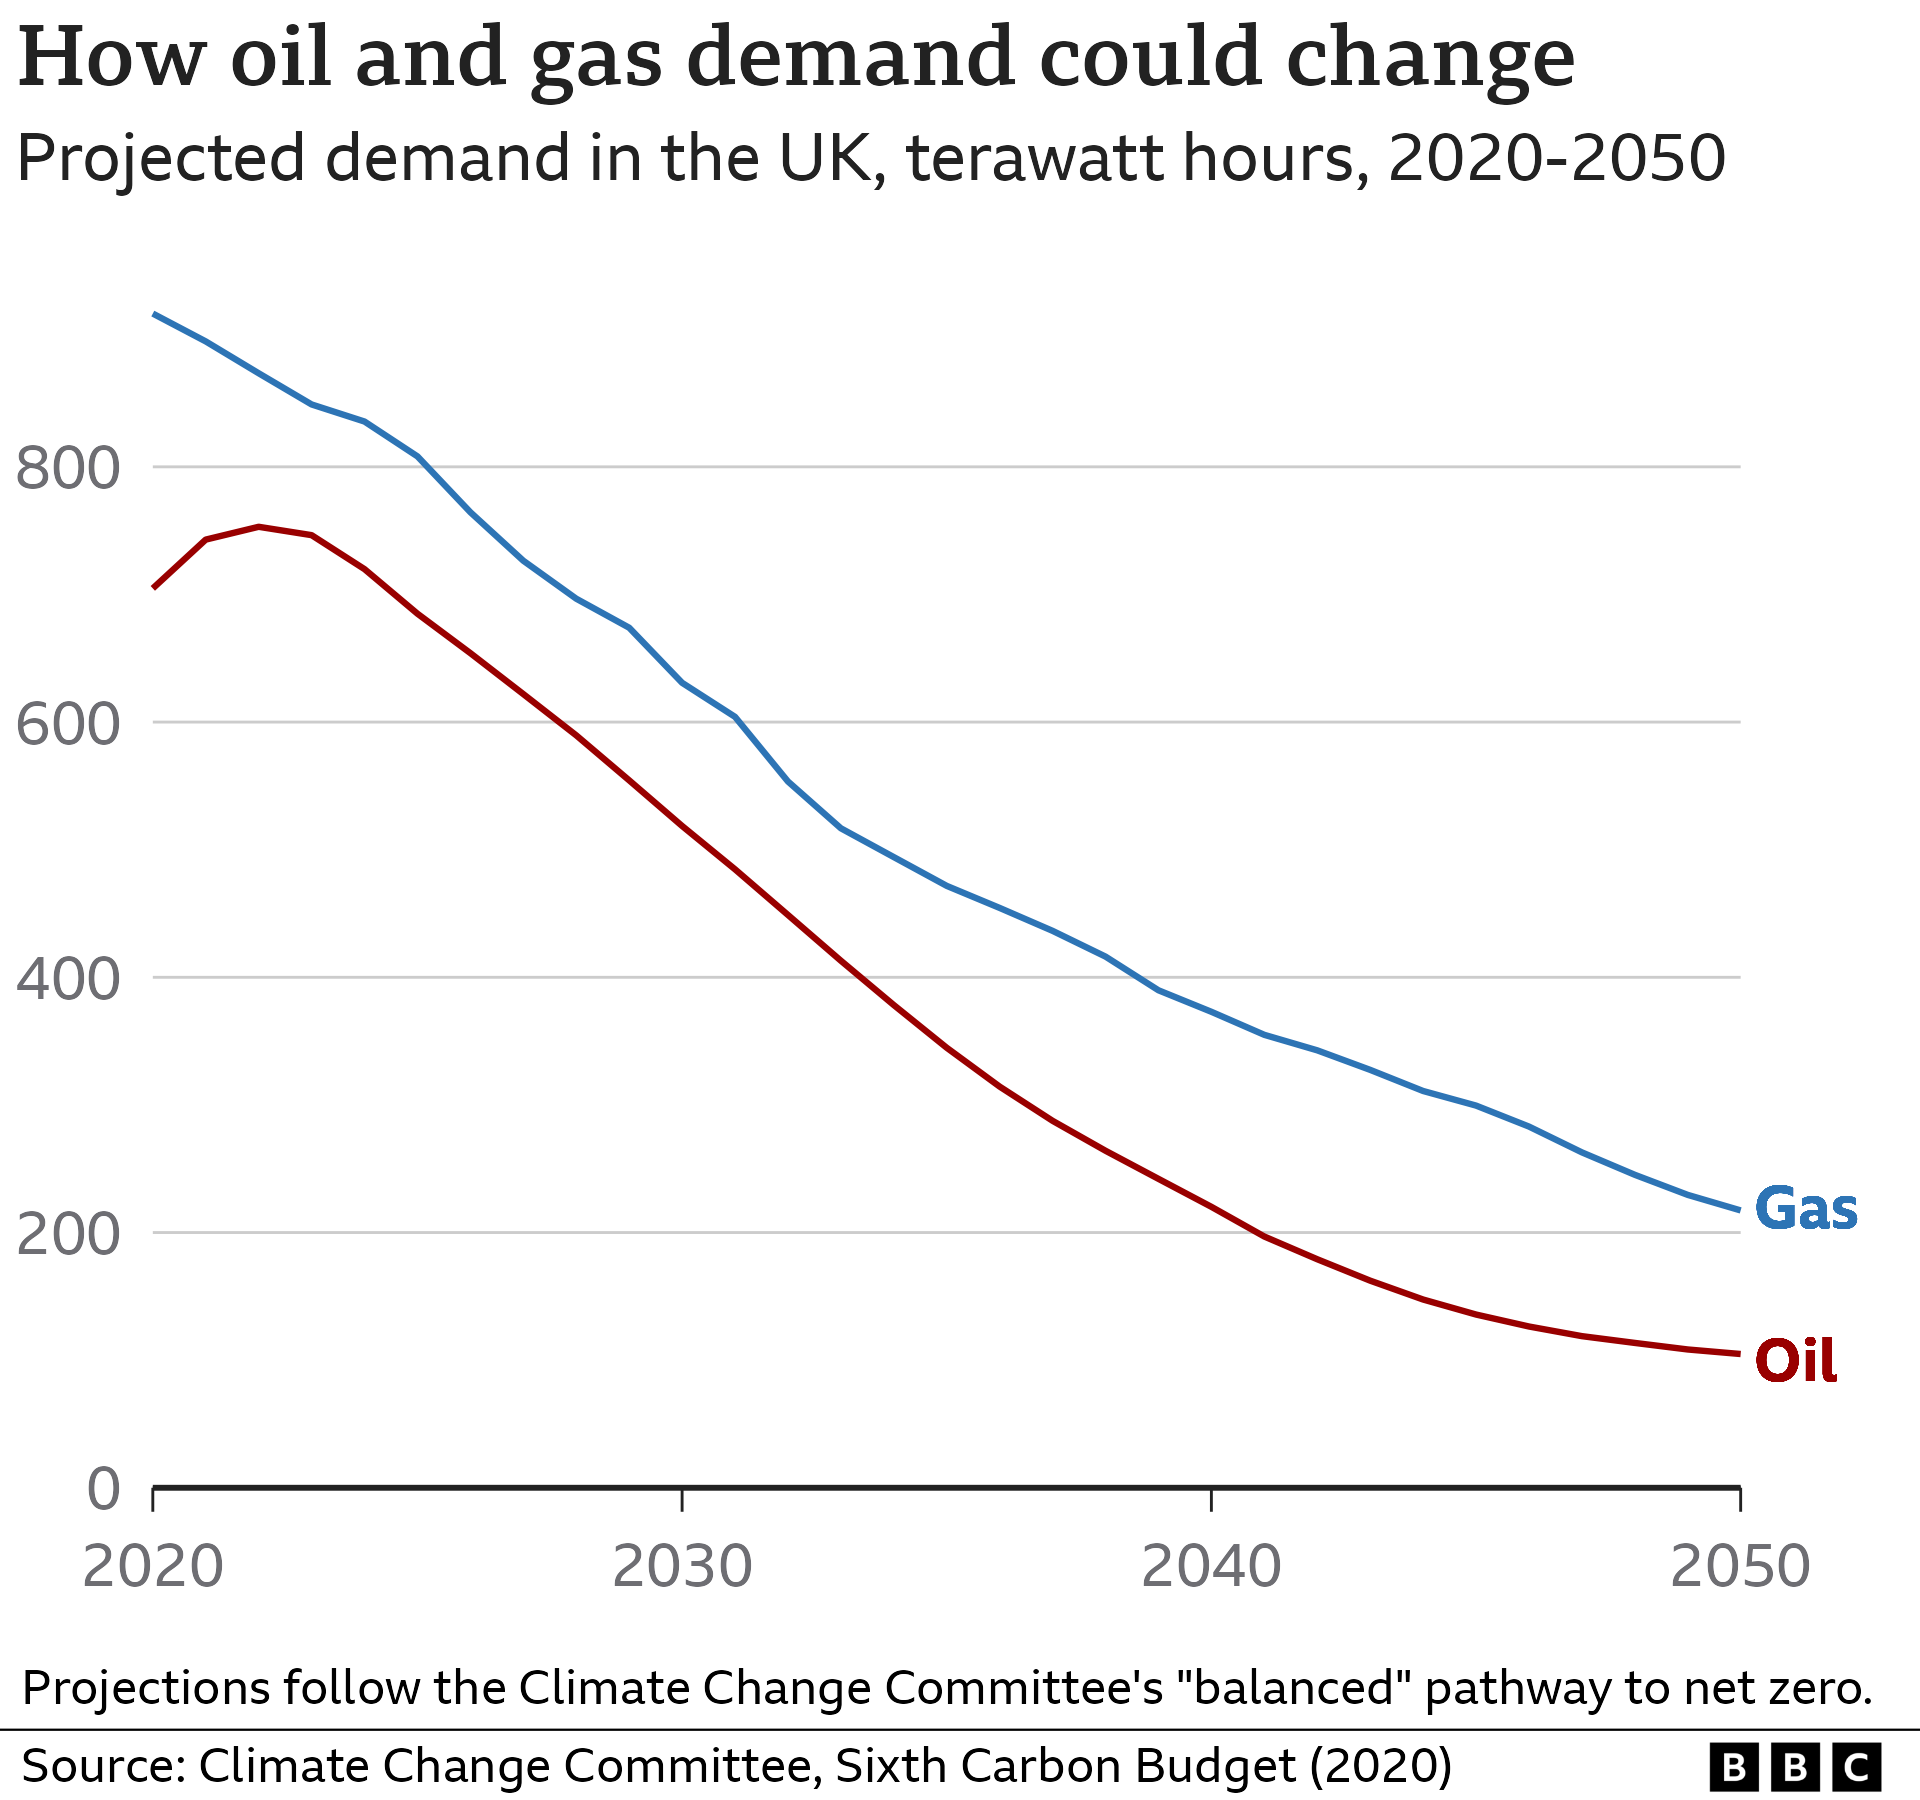 Graph of projected oil and gas demand in the UK between 2020 and 2050. Both show substantial declines, in particular oil.